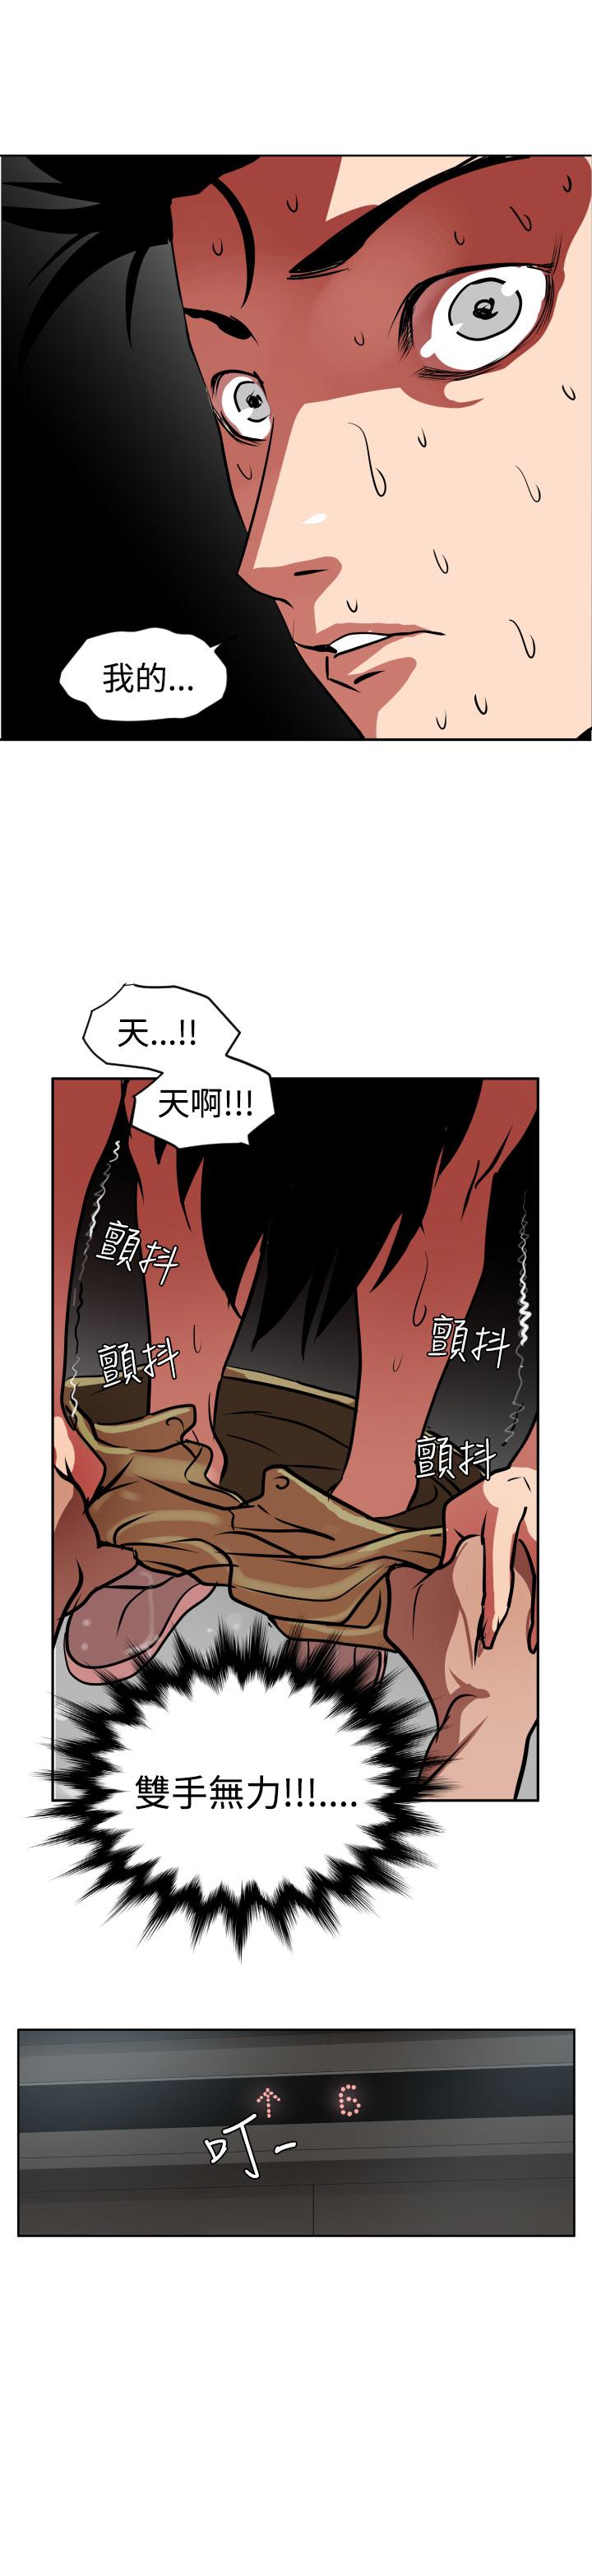 Desire King (慾求王) Ch.1-16 (chinese) 428